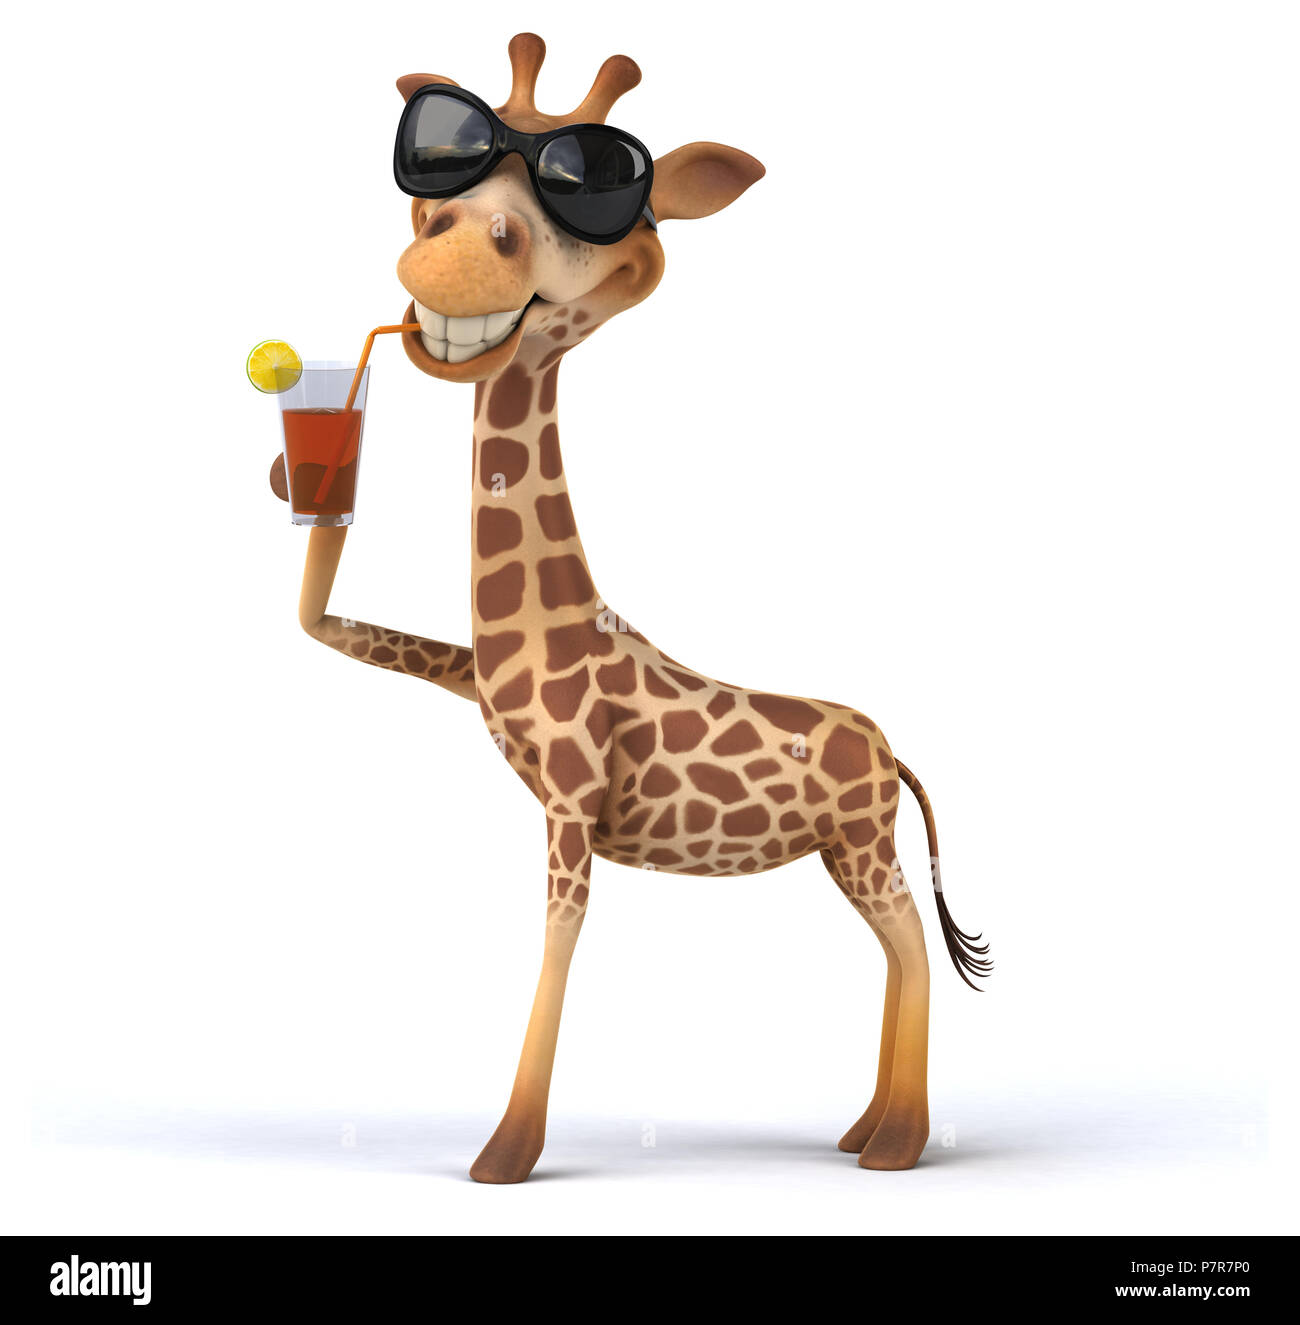 Drink giraffe Cut Out Stock Images & Pictures - Alamy